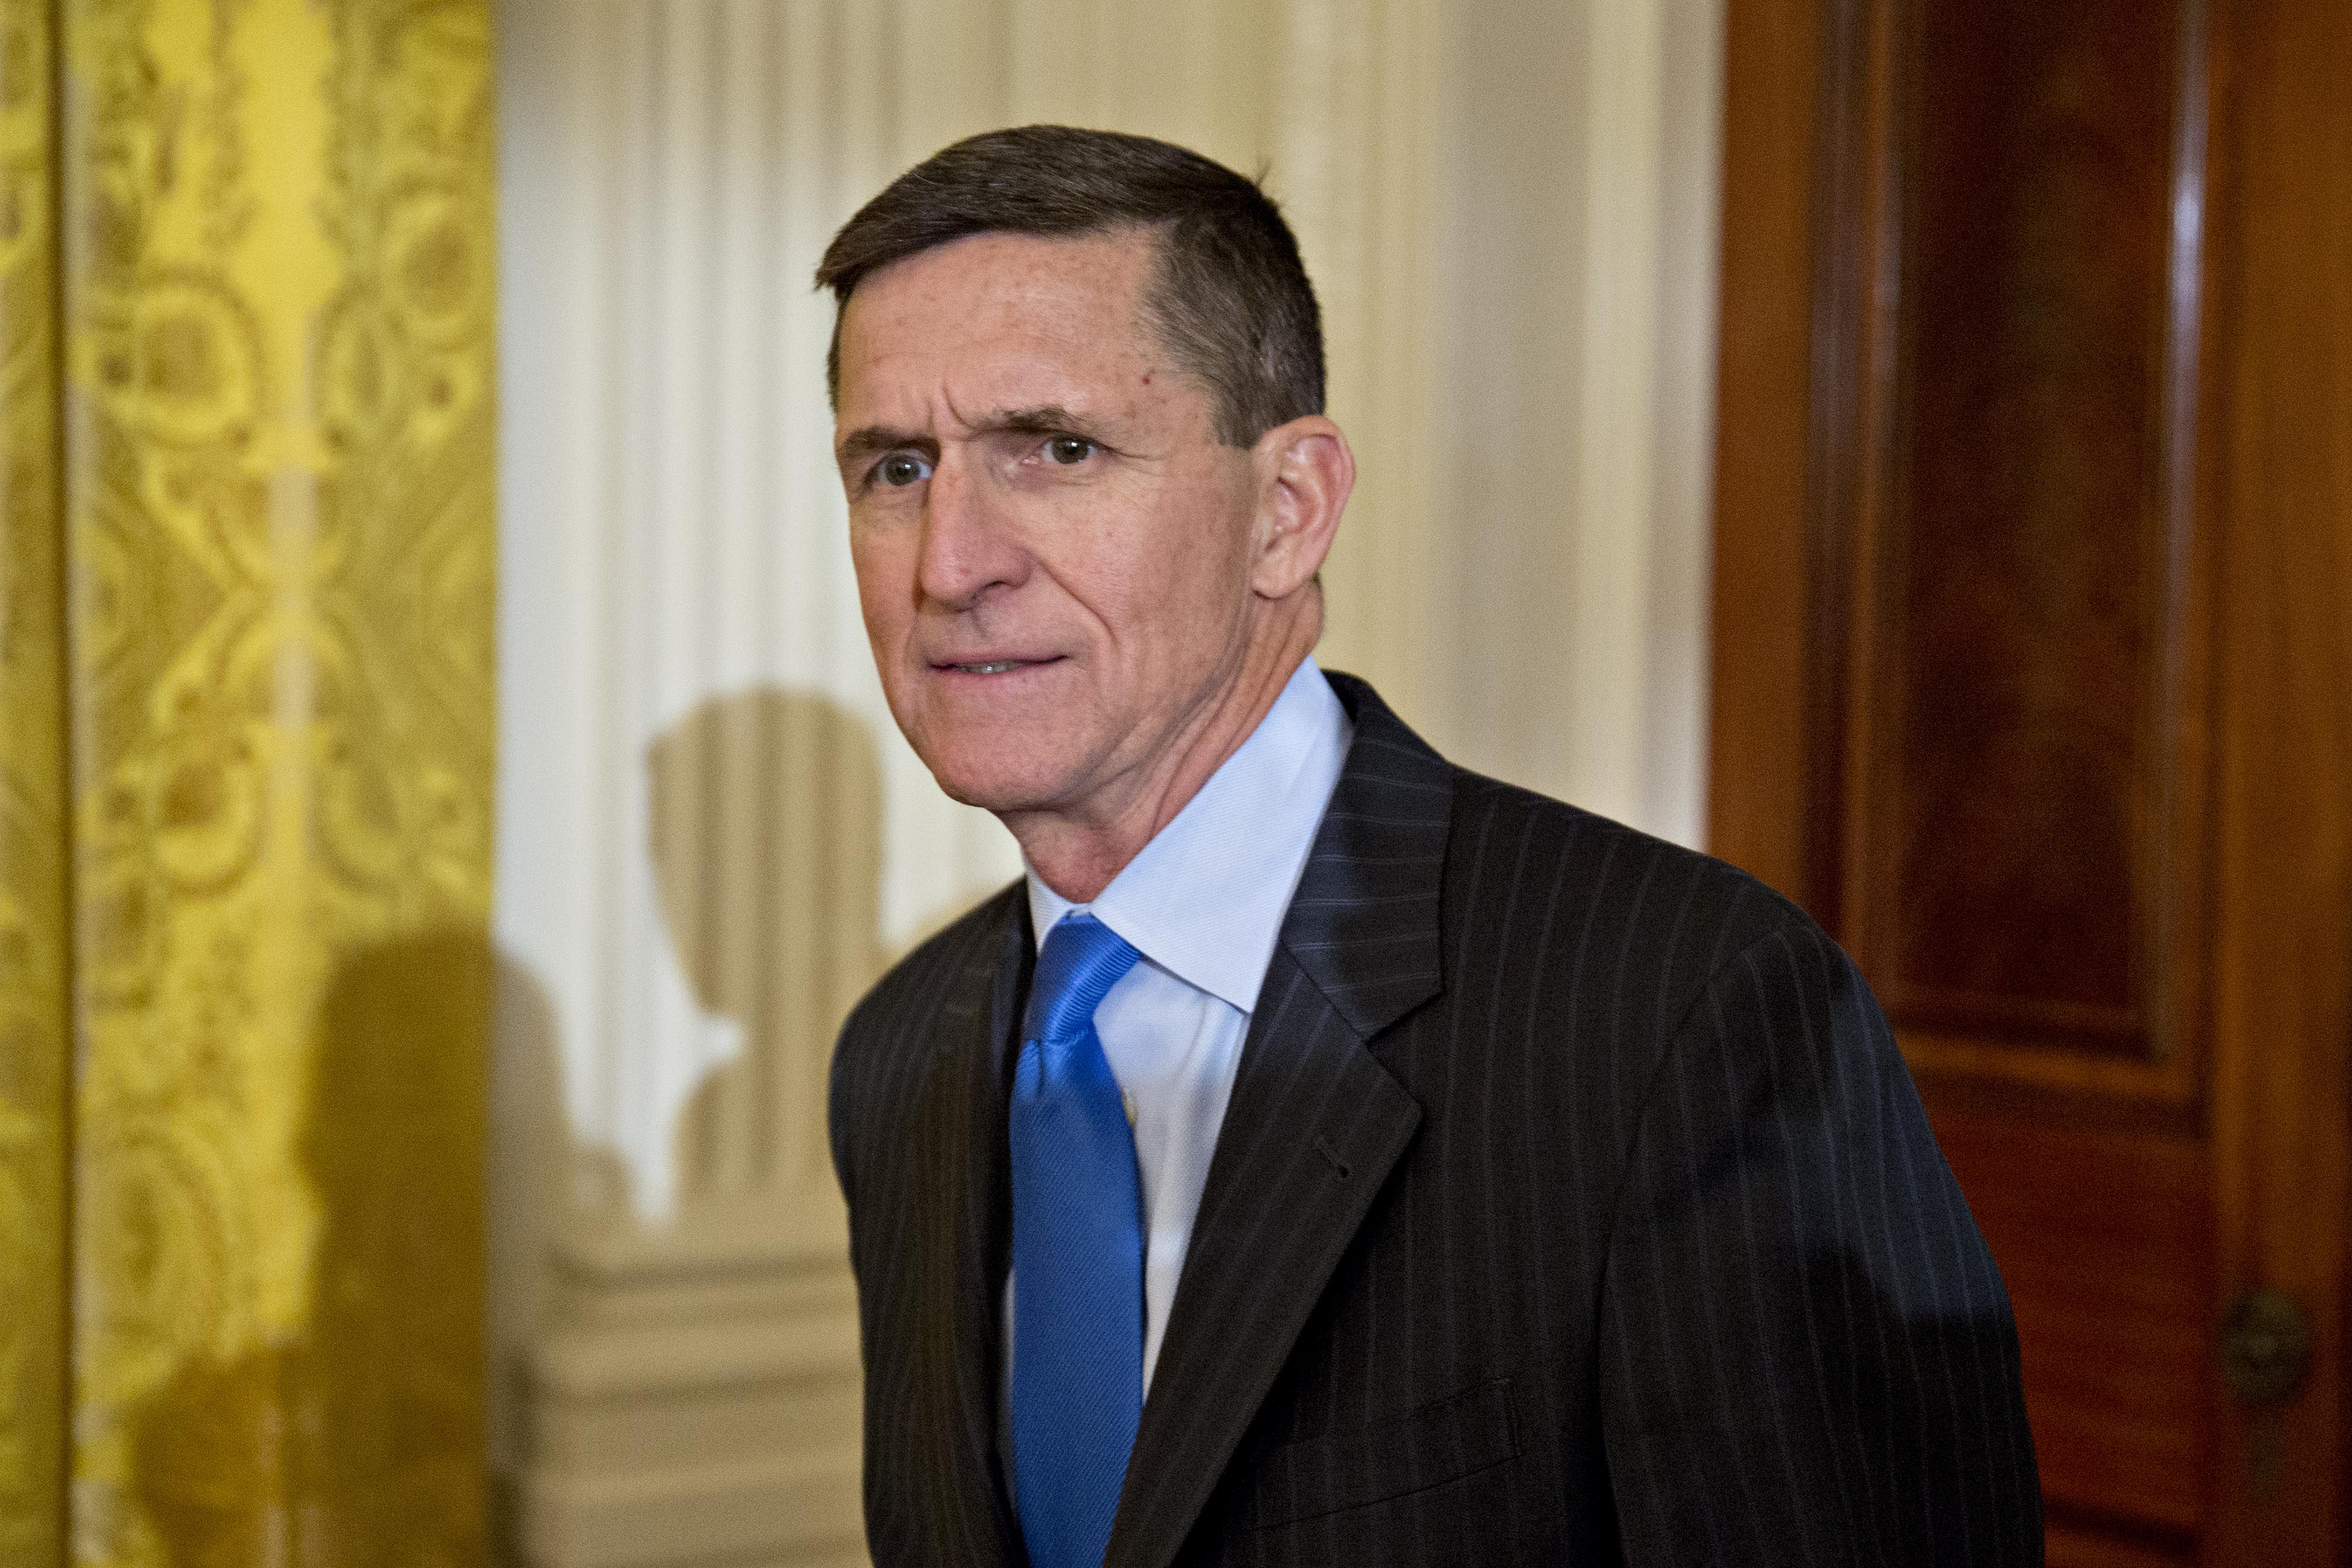 Retired Lieutenant General Michael Flynn arrives to a swearing in ceremony of White House senior staff in the East Room of the White House in Washington, D.C., U.S., on Sunday, Jan. 22, 2017. (Andrew Harrer—Bloomberg via Getty Images)